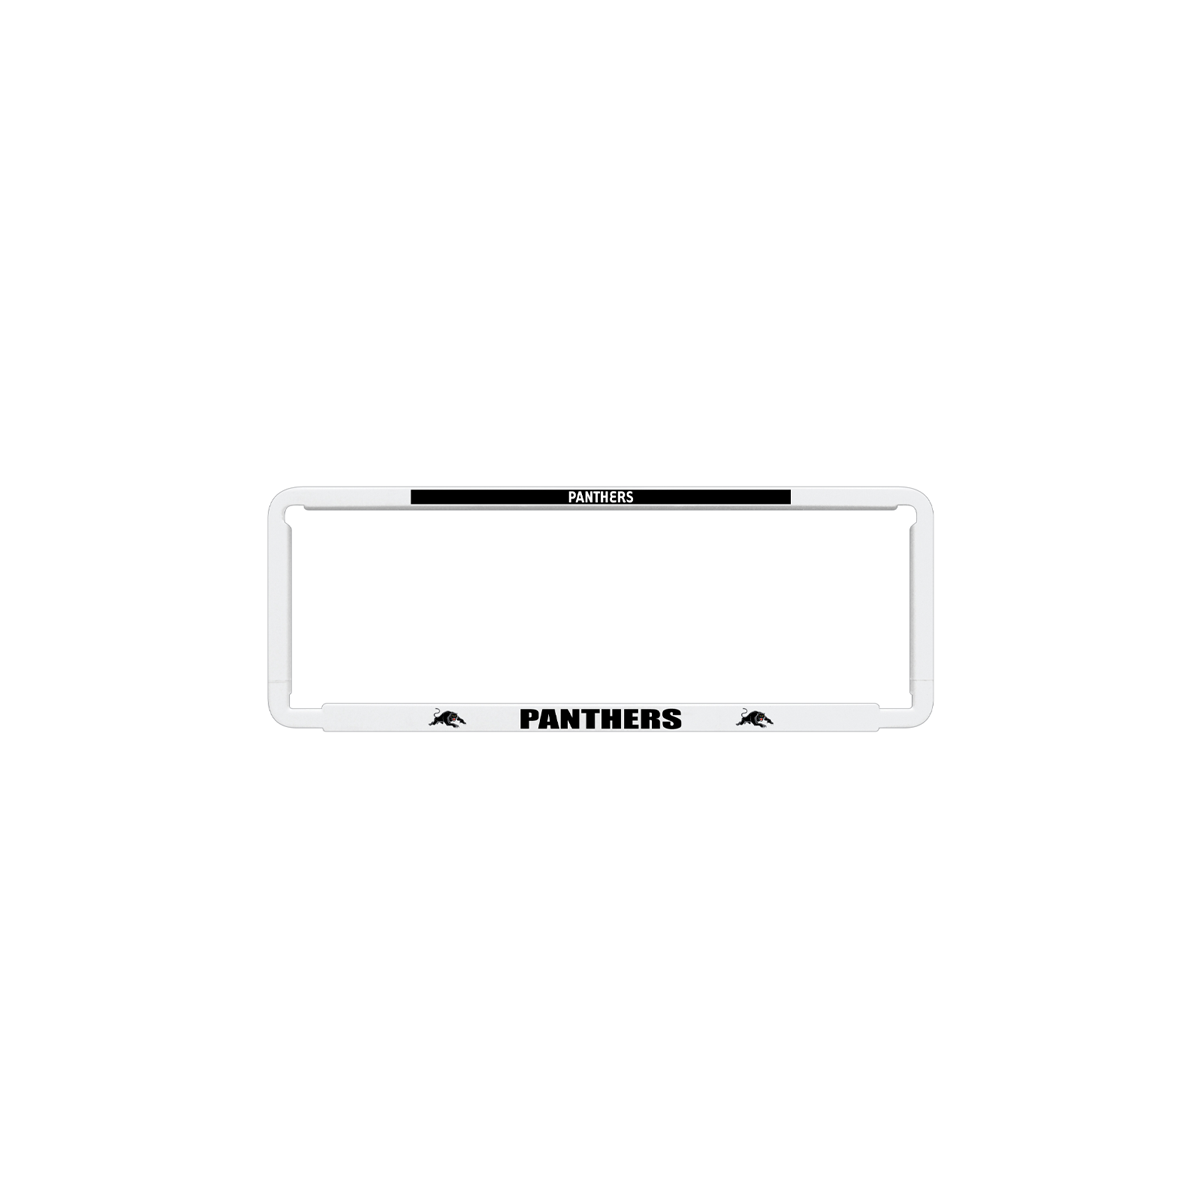 Penrith Panthers NRL Number Plate Cover